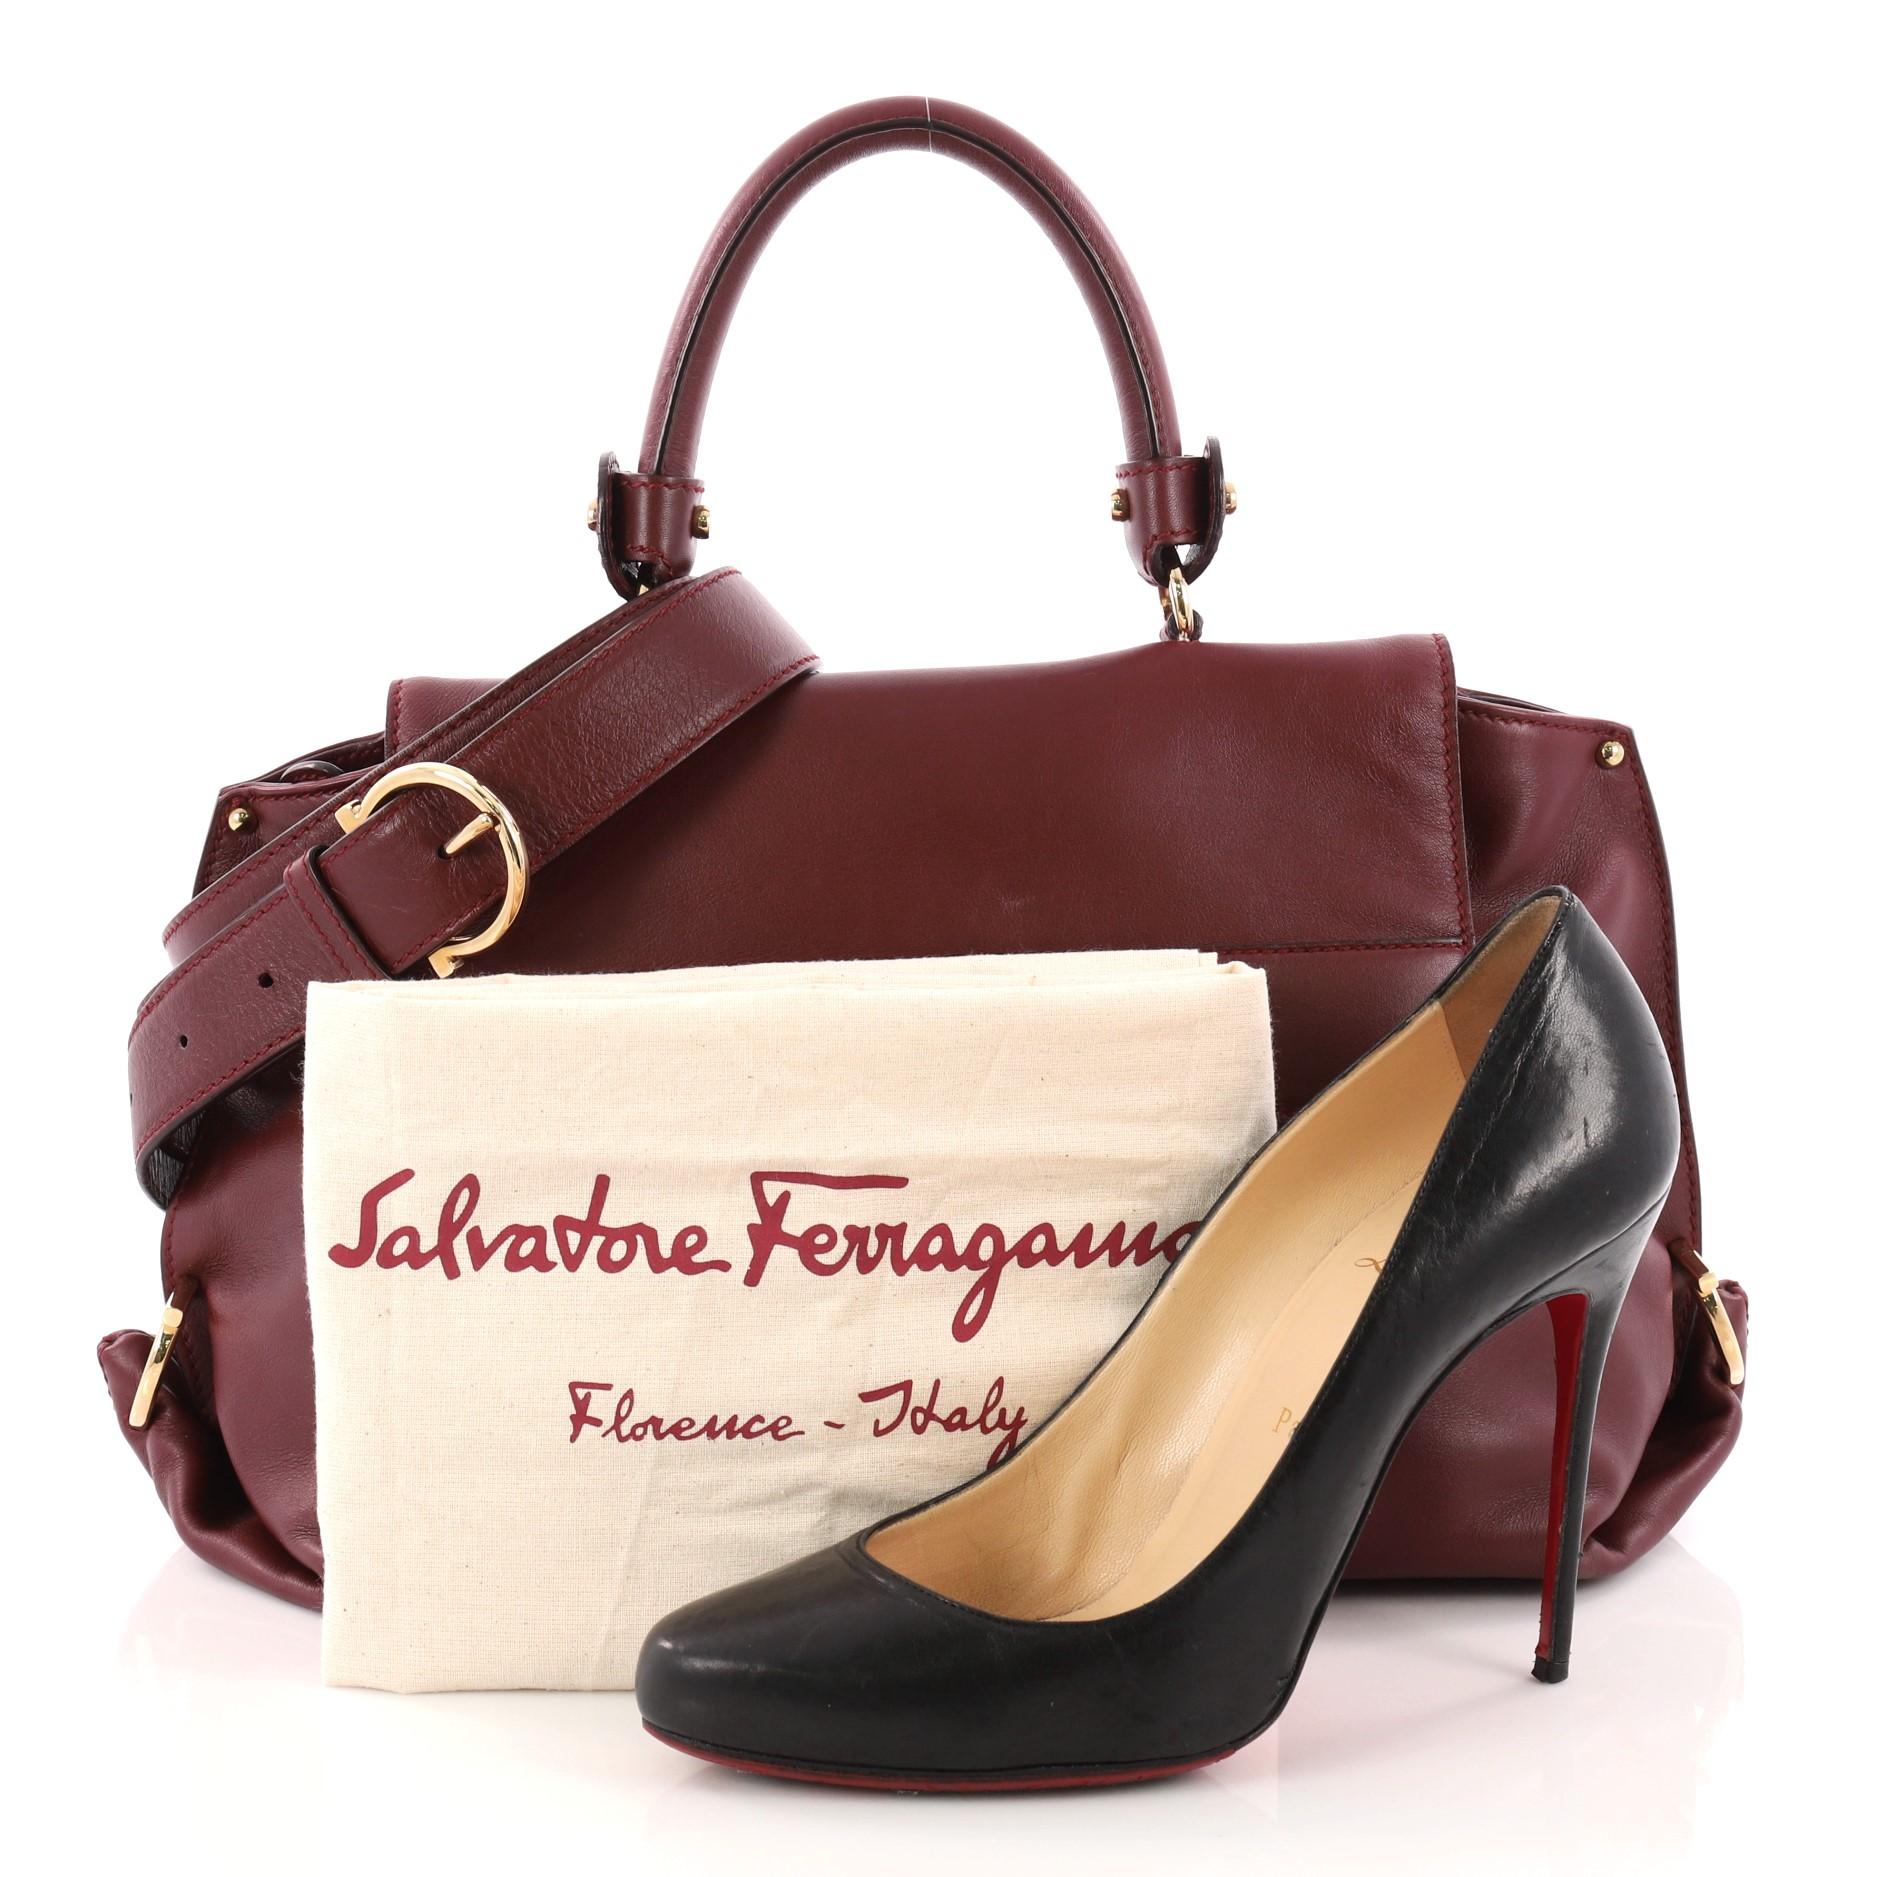 This authentic Salvatore Ferragamo Sofia Satchel Smooth Leather Medium is stylish and functional. Crafted in burgundy smooth leather, this bag features a sturdy top handle with exterior back zip pocket, and gold-tone hardware accents. The brand's